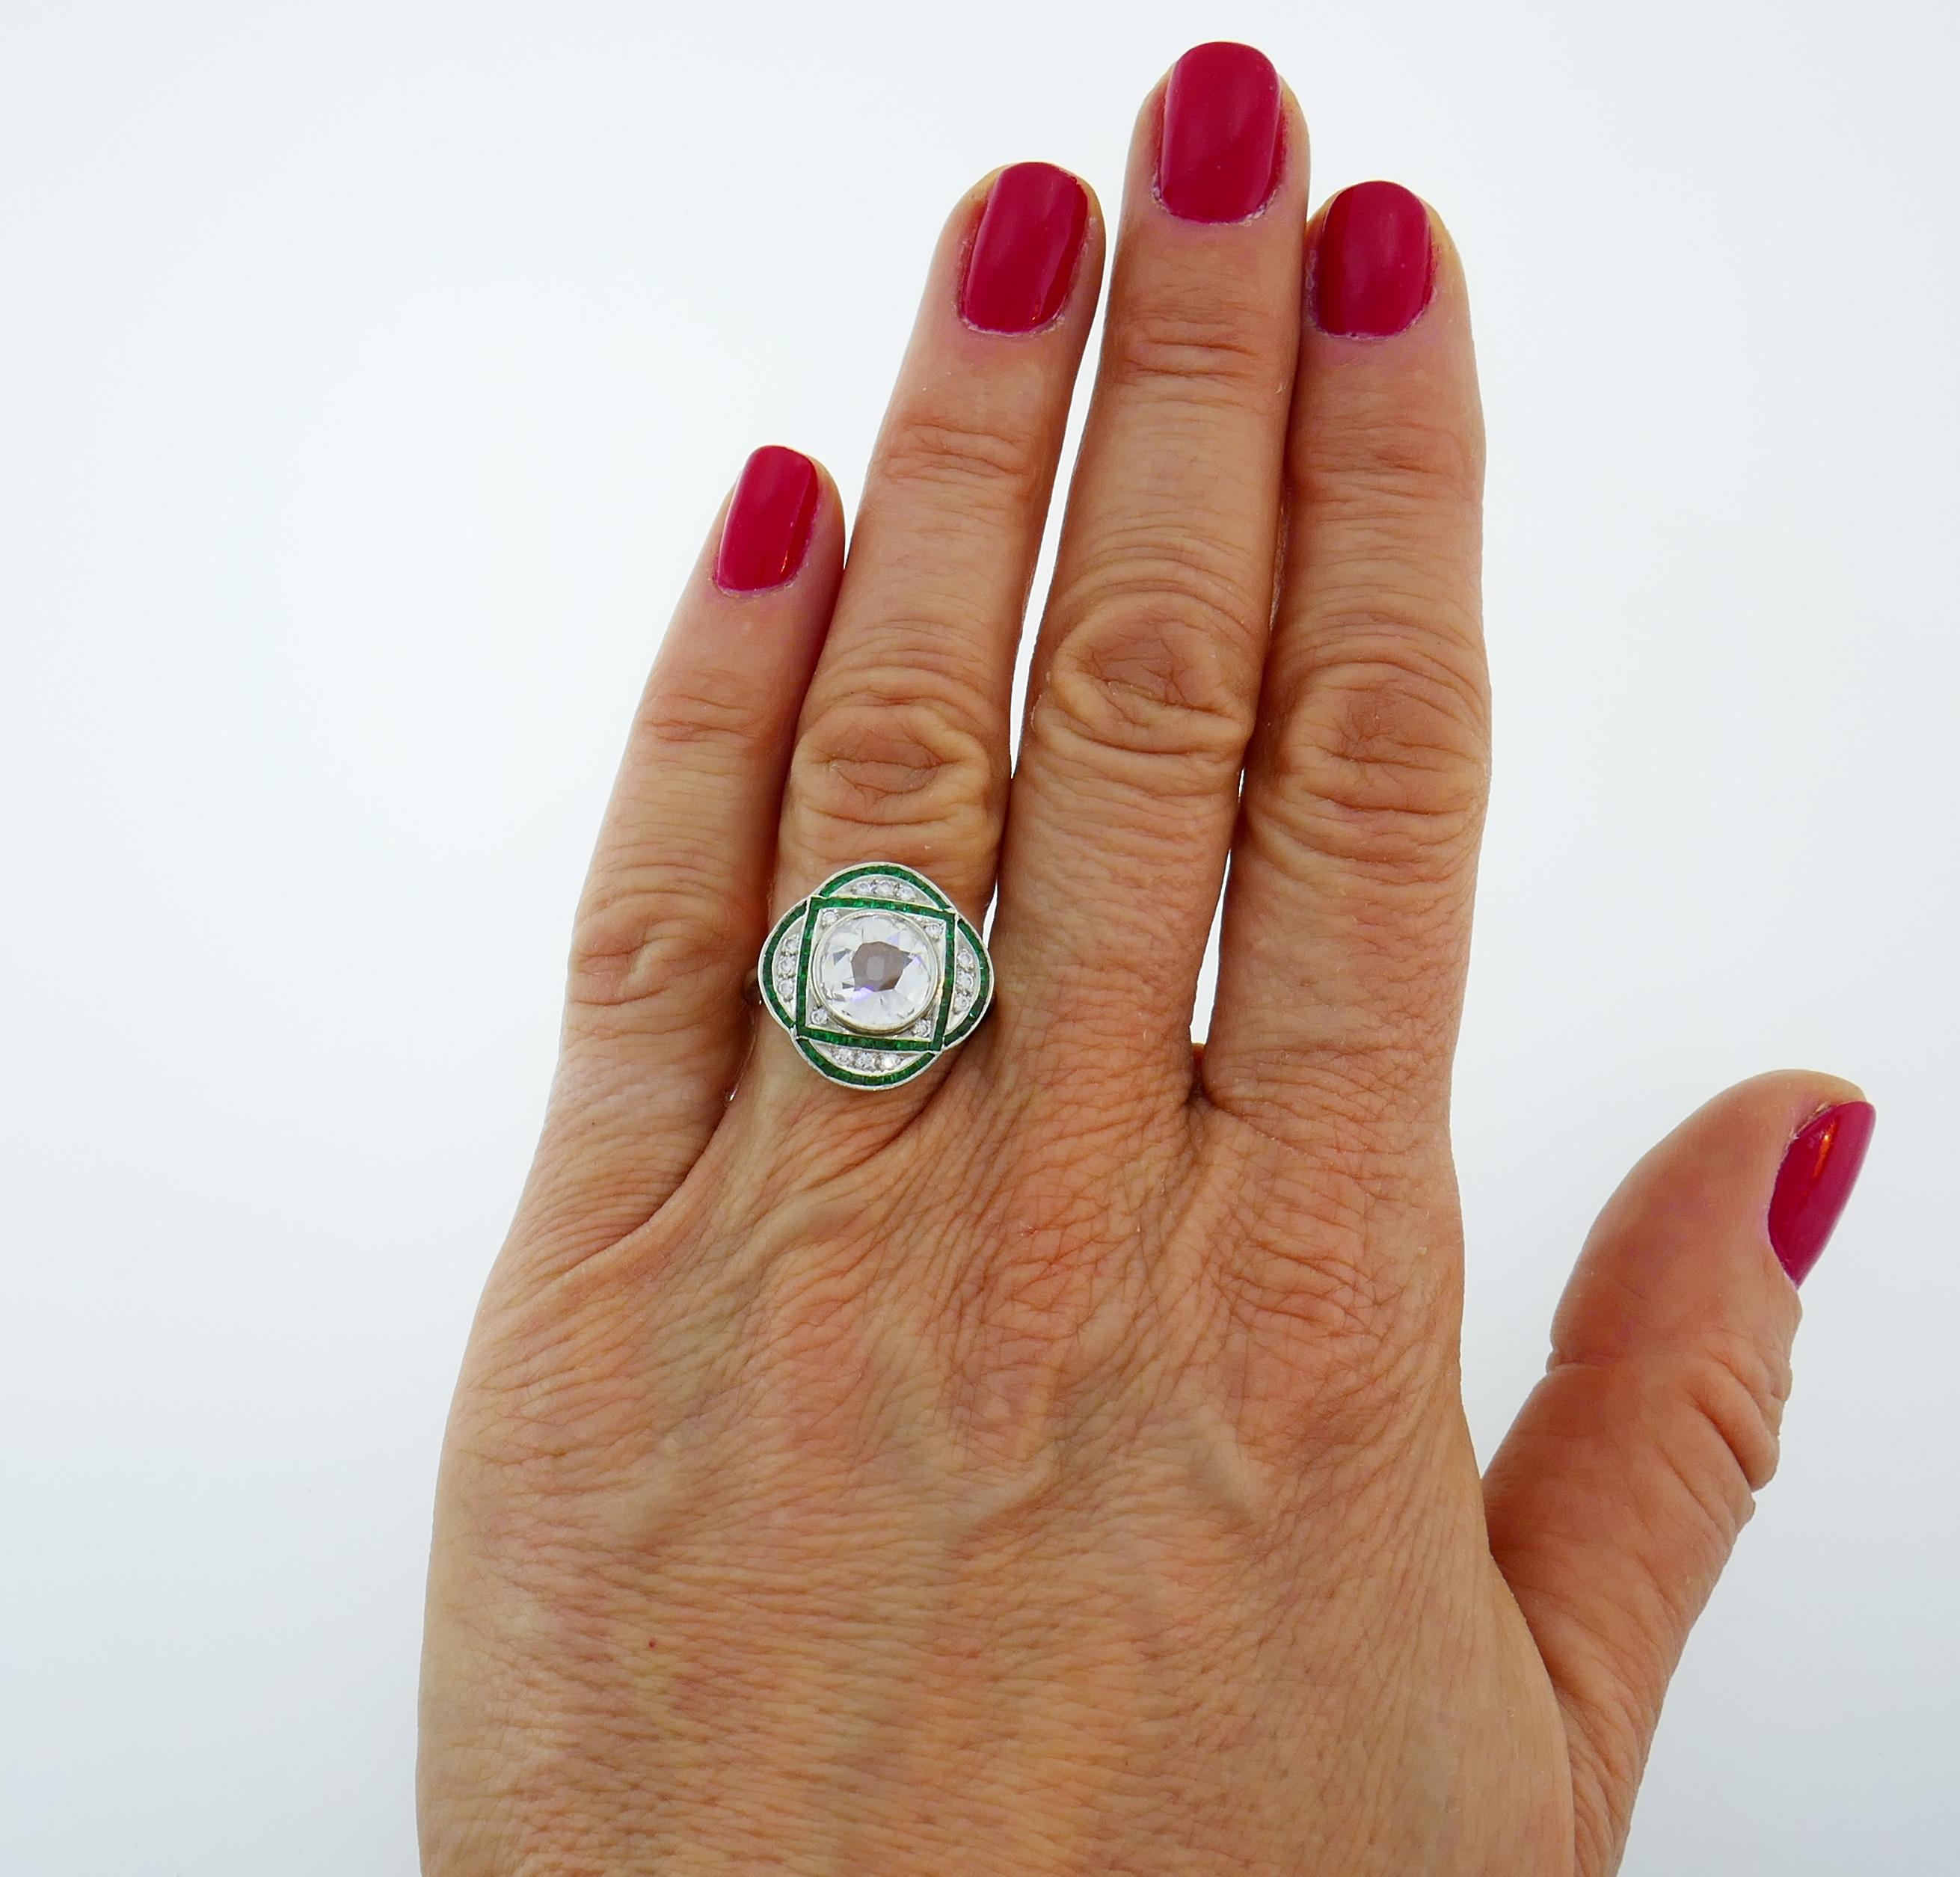 Classic Art Deco style ring. Elegant, timeless, feminine and wearable, the ring is a great addition to your jewelry collection. It can also make a beautiful engagement ring.
Made of platinum (tested), the ring features a hand-faceted old